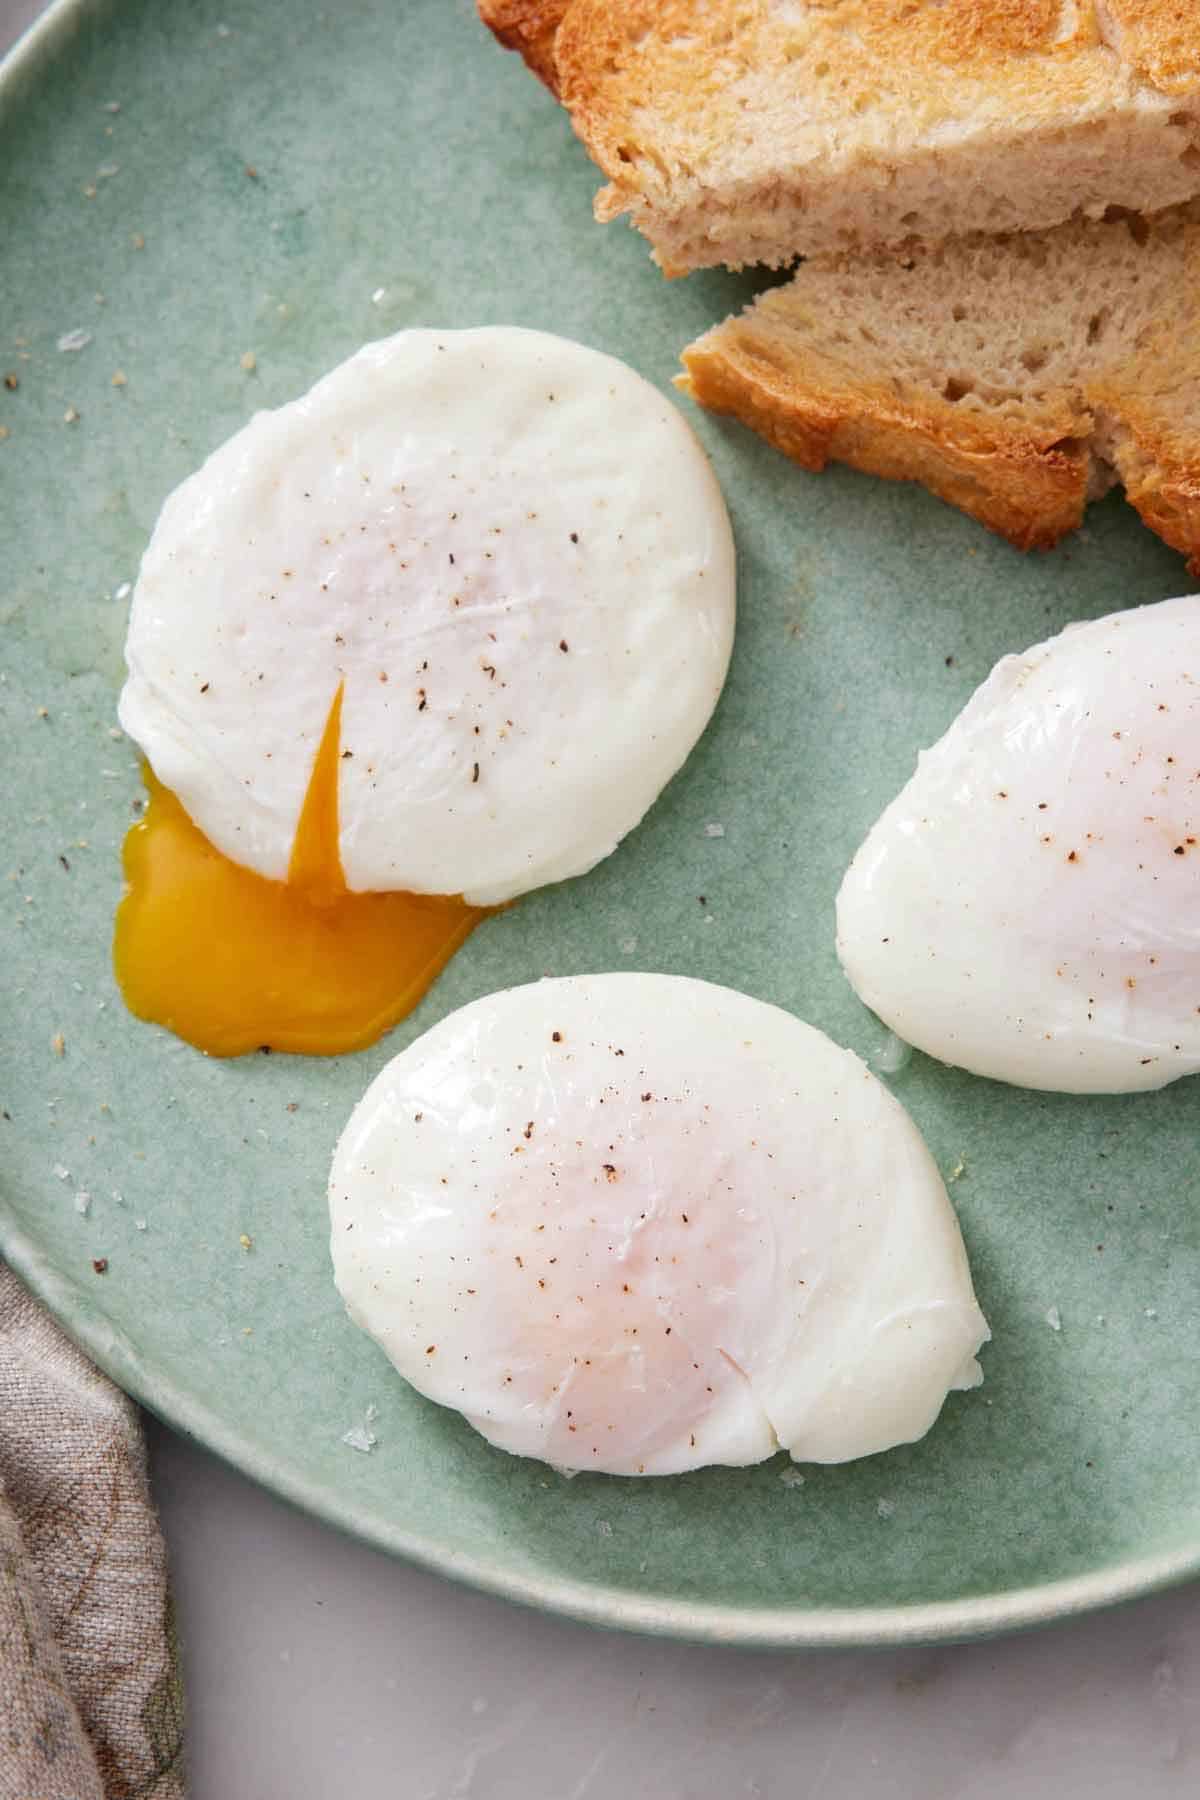 A plate with three poached eggs, one slightly cut with the yolk oozing out.